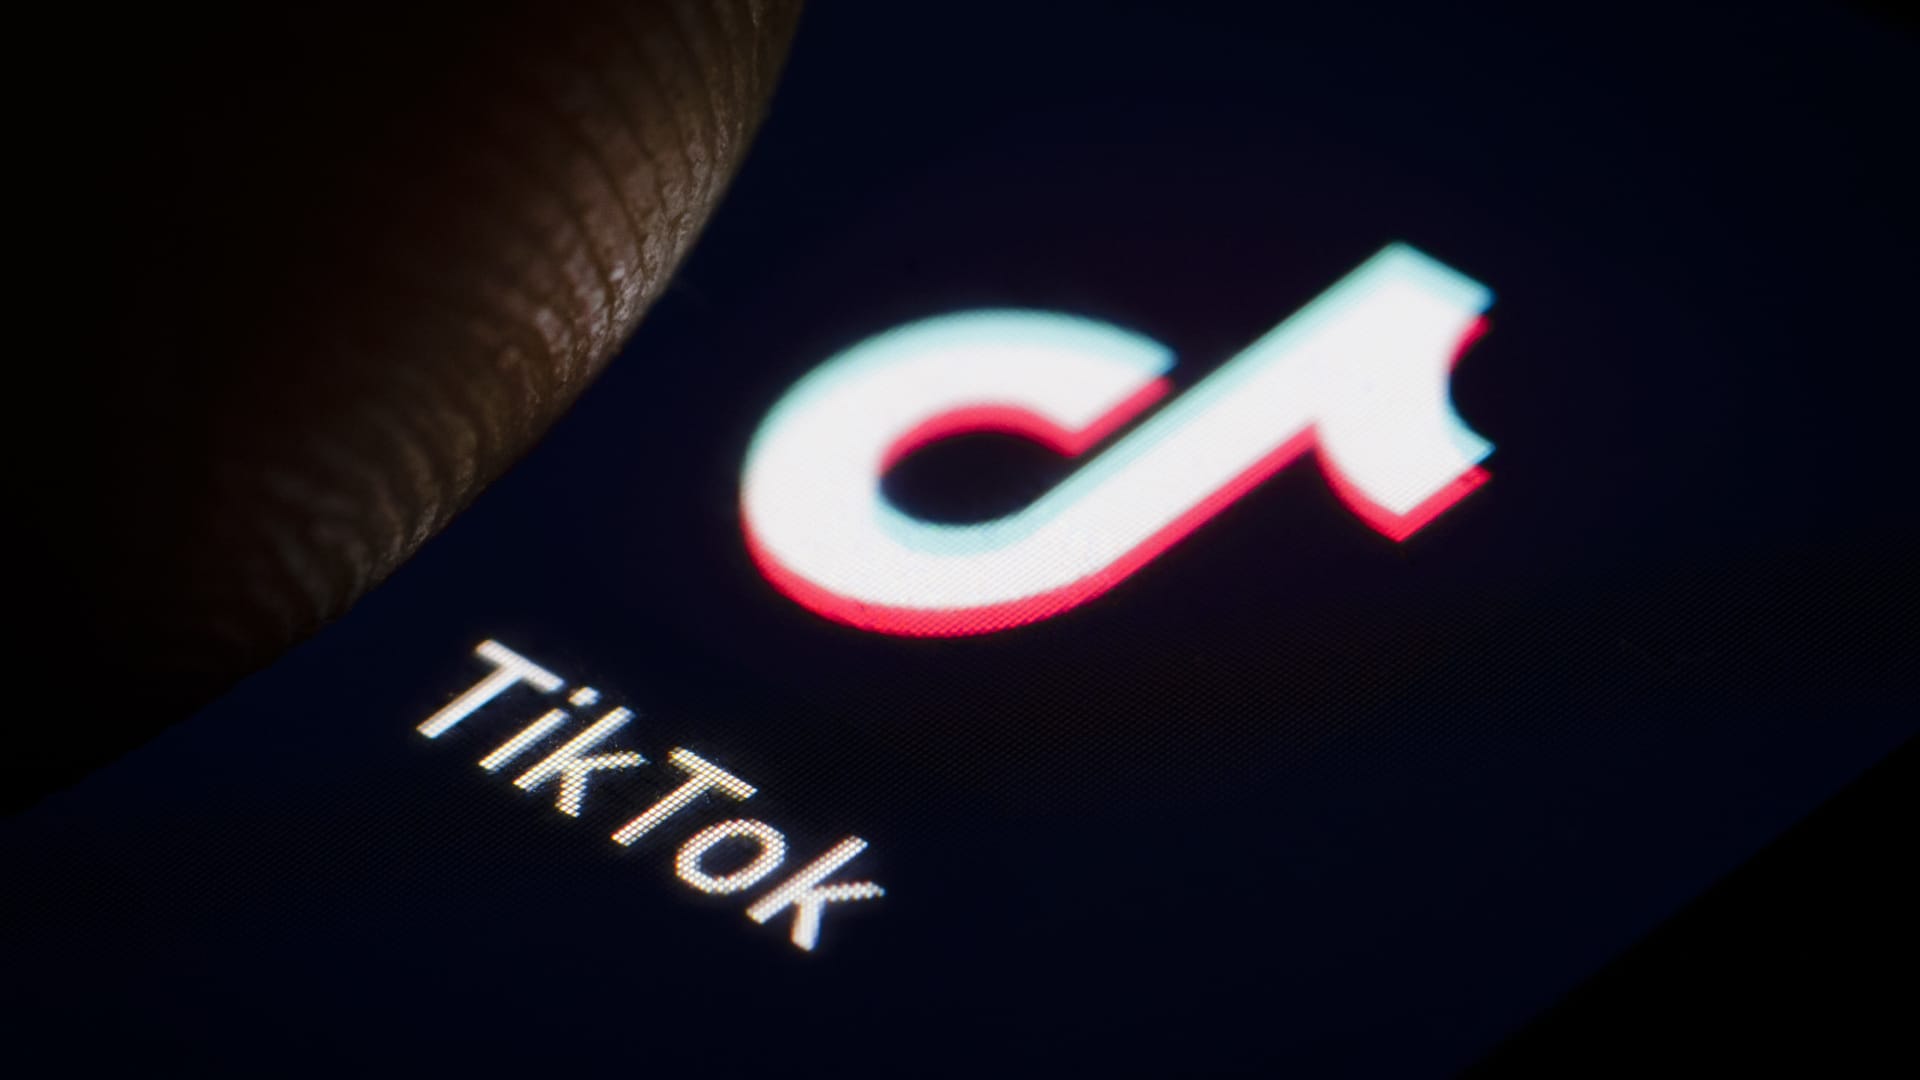 TikTok disappears from Hong Kong app stores after new national security law comes into effect